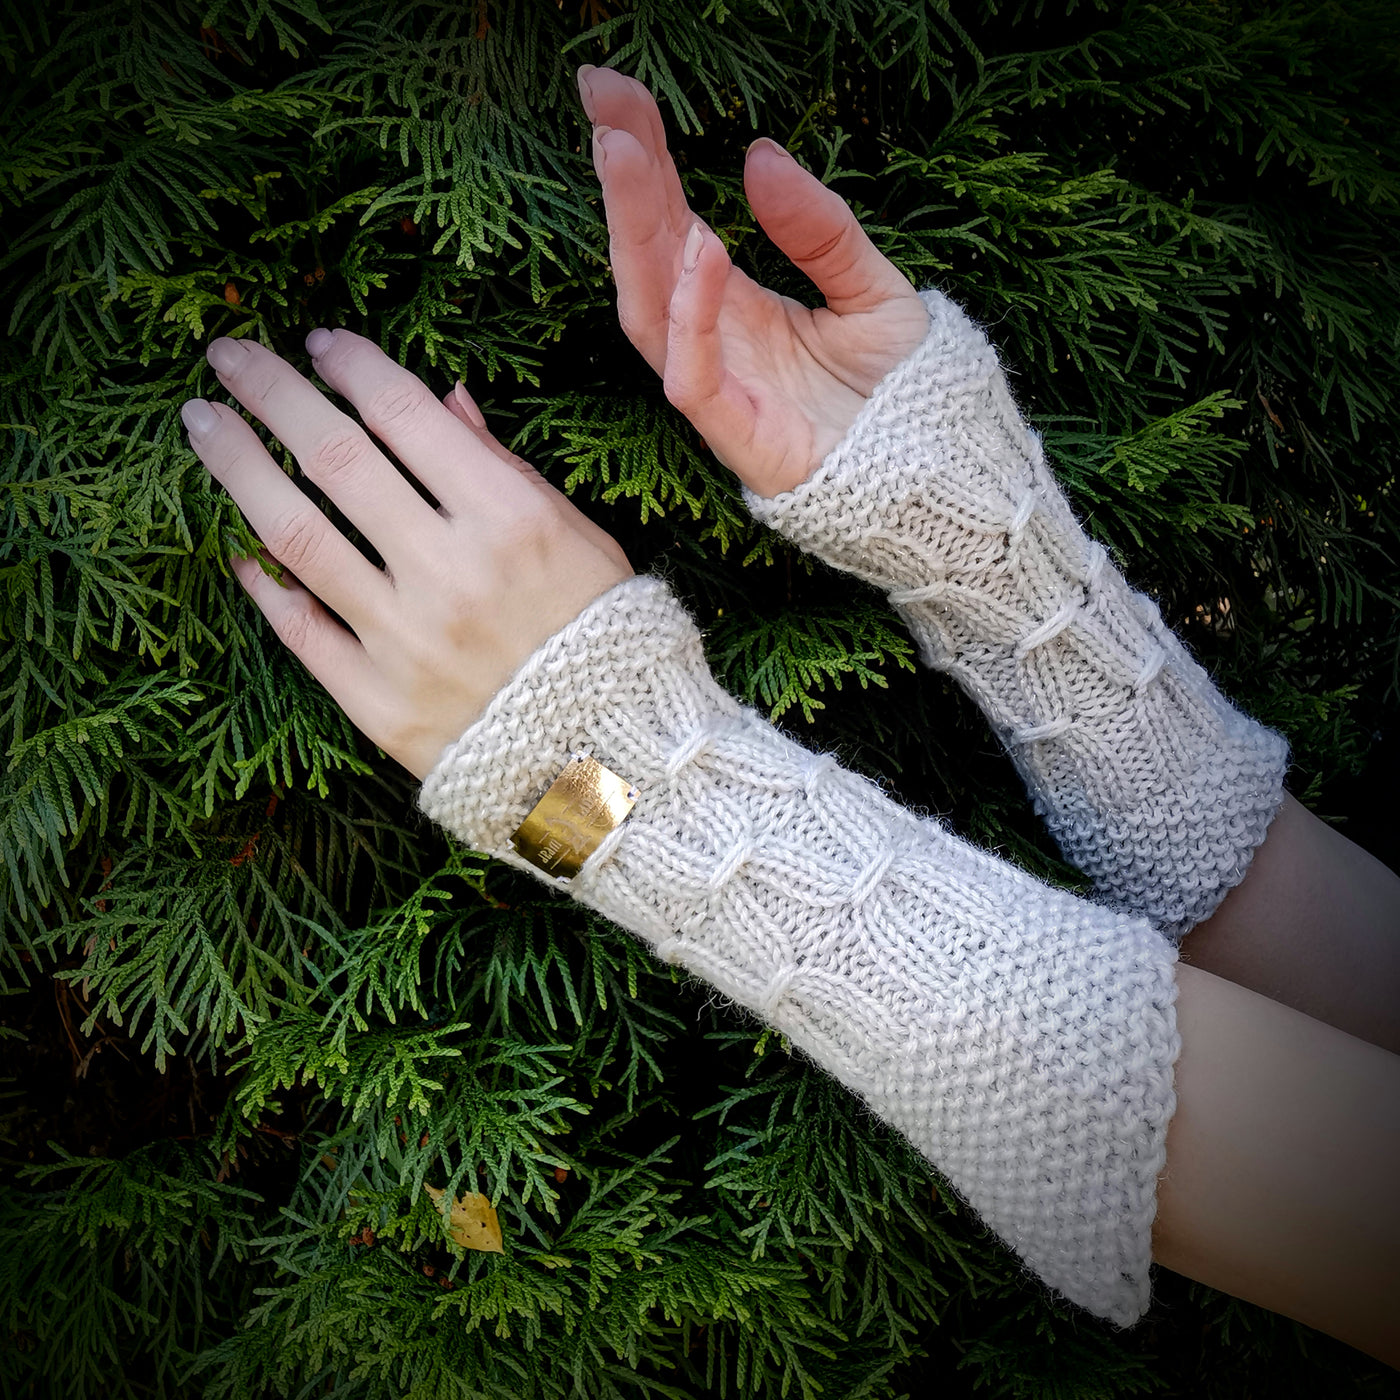 Handmade knitted sparkling white wrist warmers